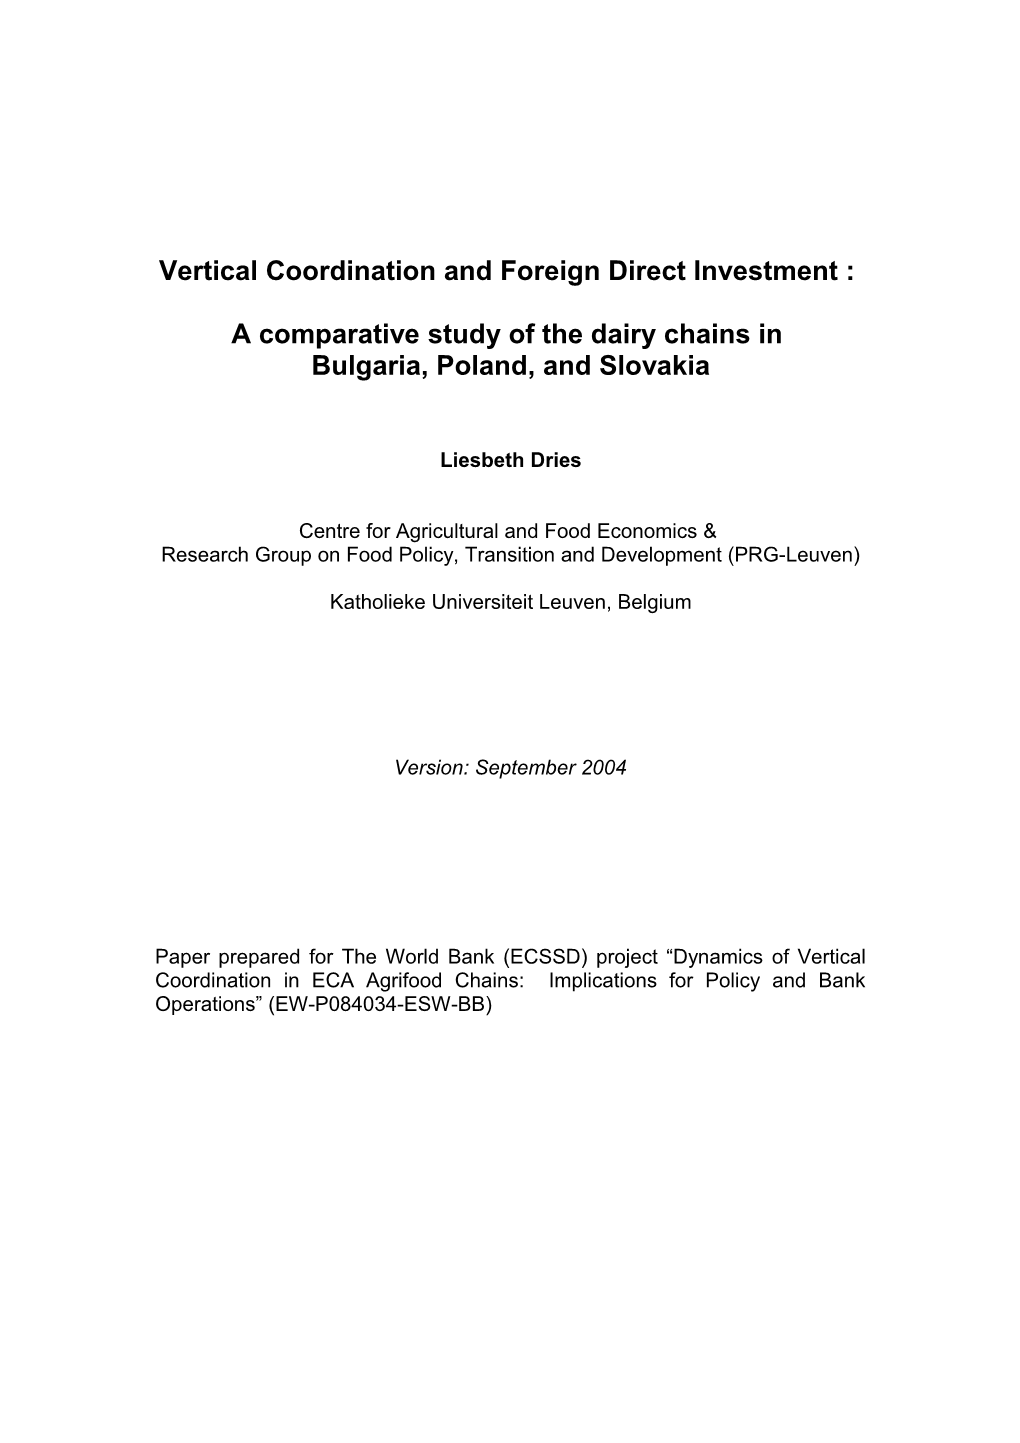 Vertical Coordination and Foreign Direct Investments in the Dairy Sector in Central Eastern